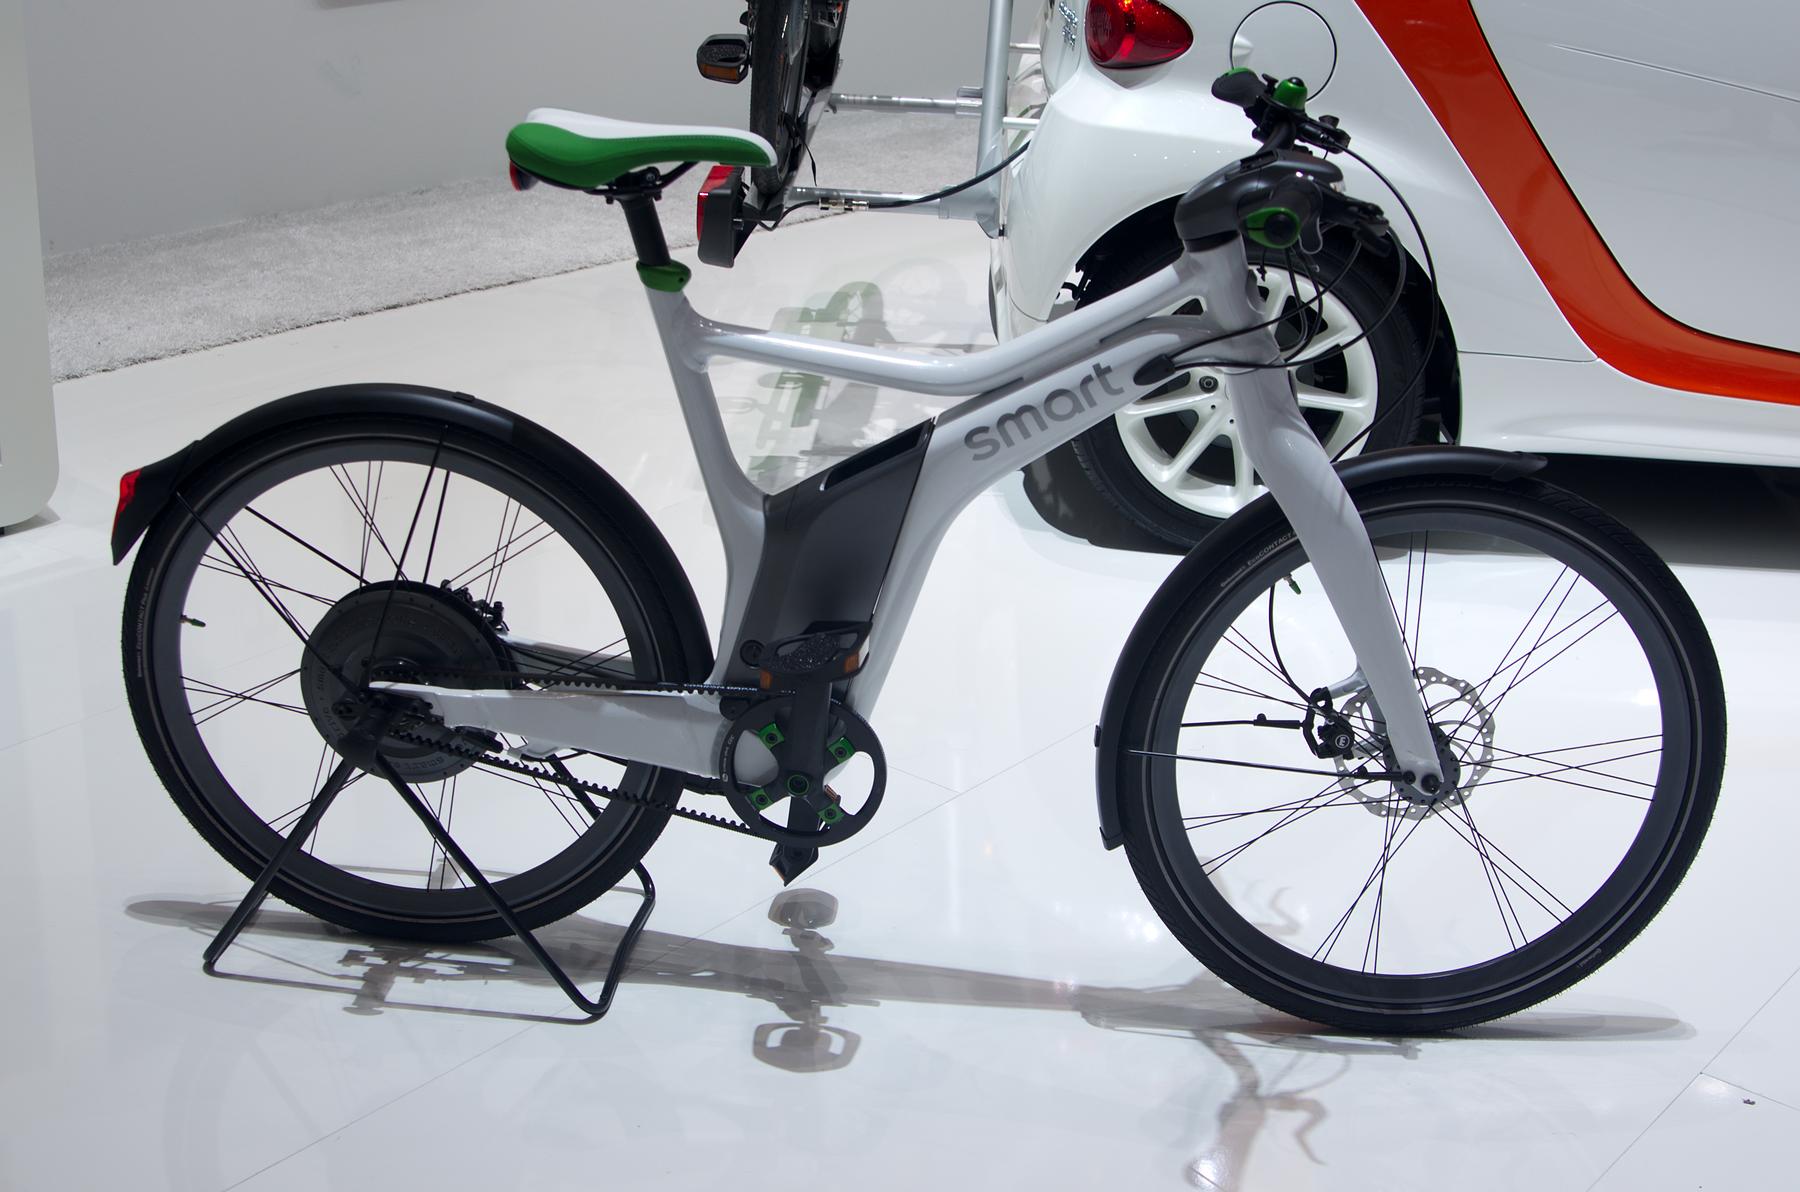 File:Geneva MotorShow 2013 - Smart electric bike left view.jpg - a white and red car